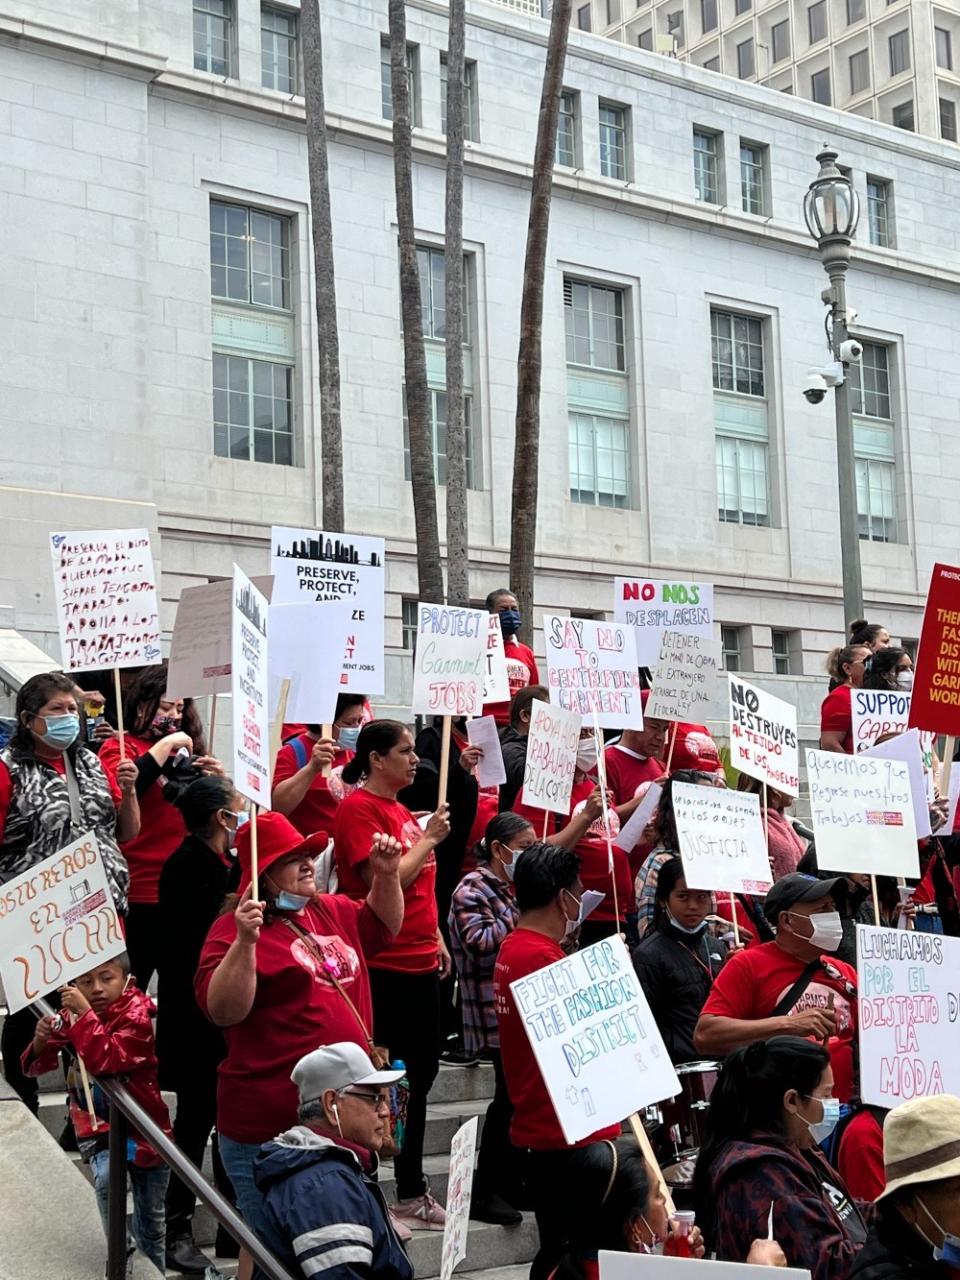 Garment workers believe the original DTLA 2040 Plan would have stripped them of essential protections.